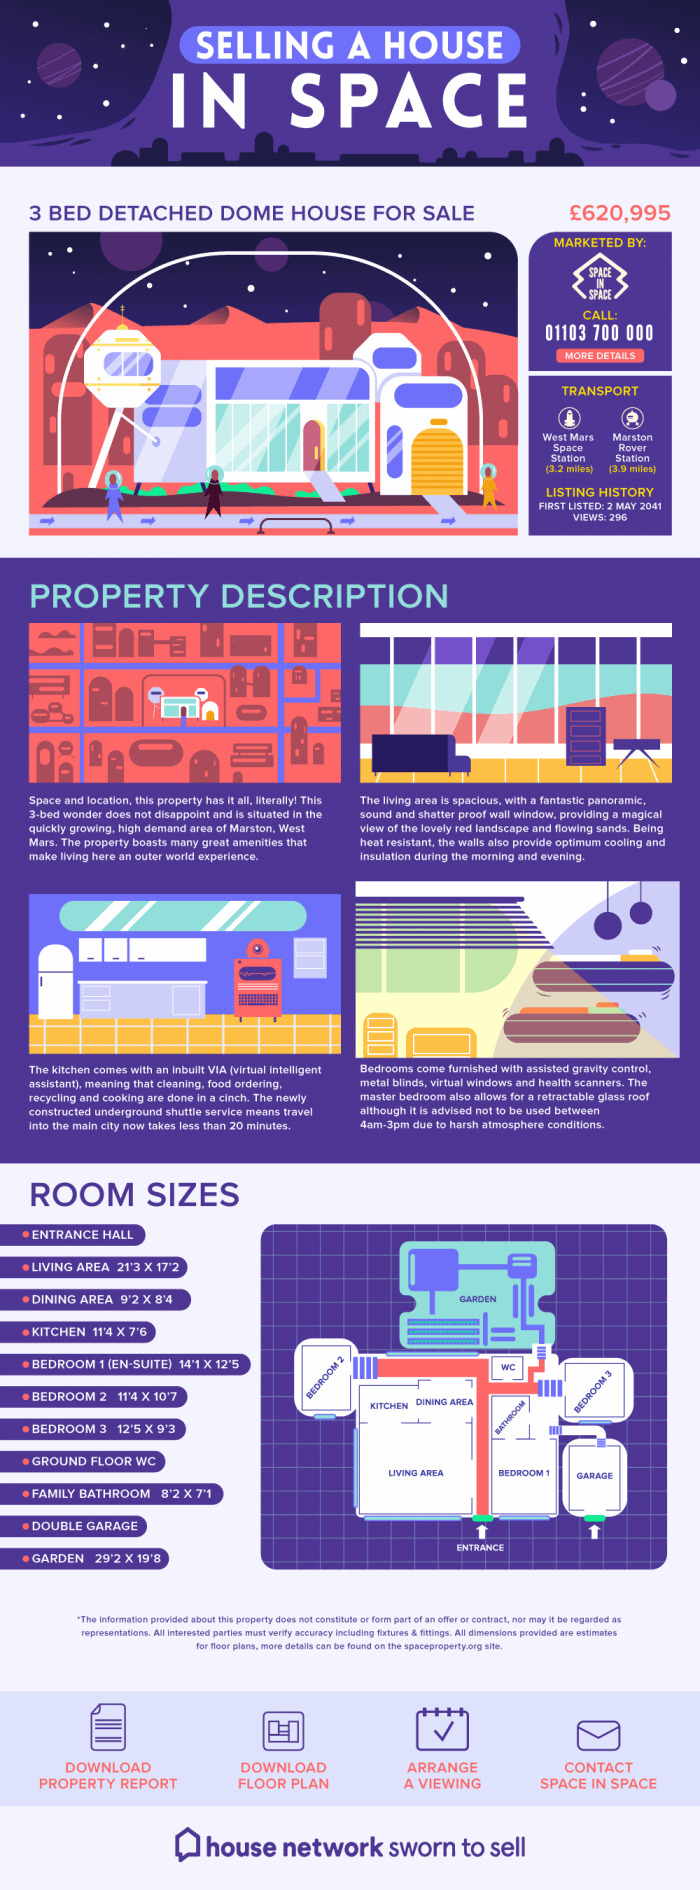 Humorous Infographic About Selling Homes in Space